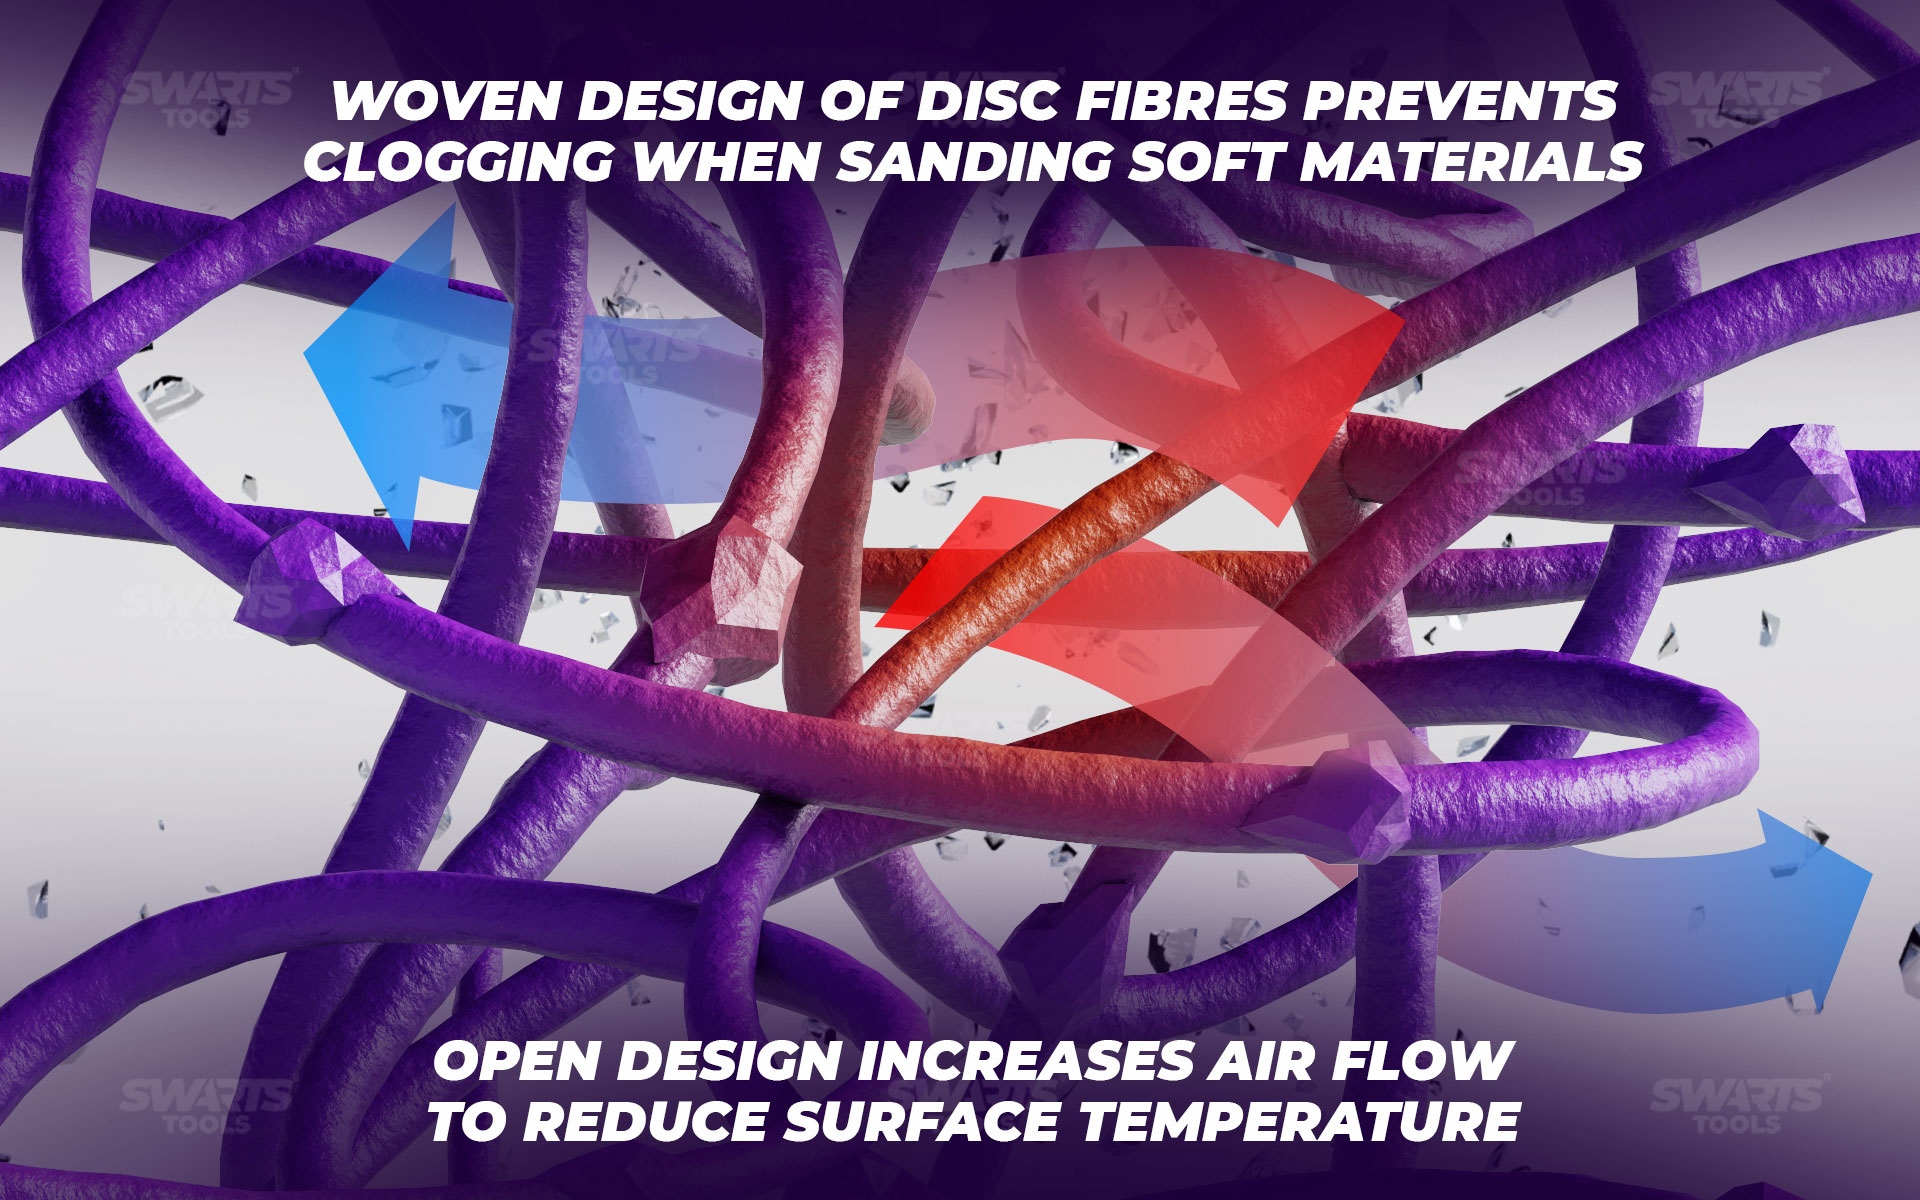 Woven design of disc fibres prevent clogging when sanding soft materials, open design increases air flow to reduce surface temperature